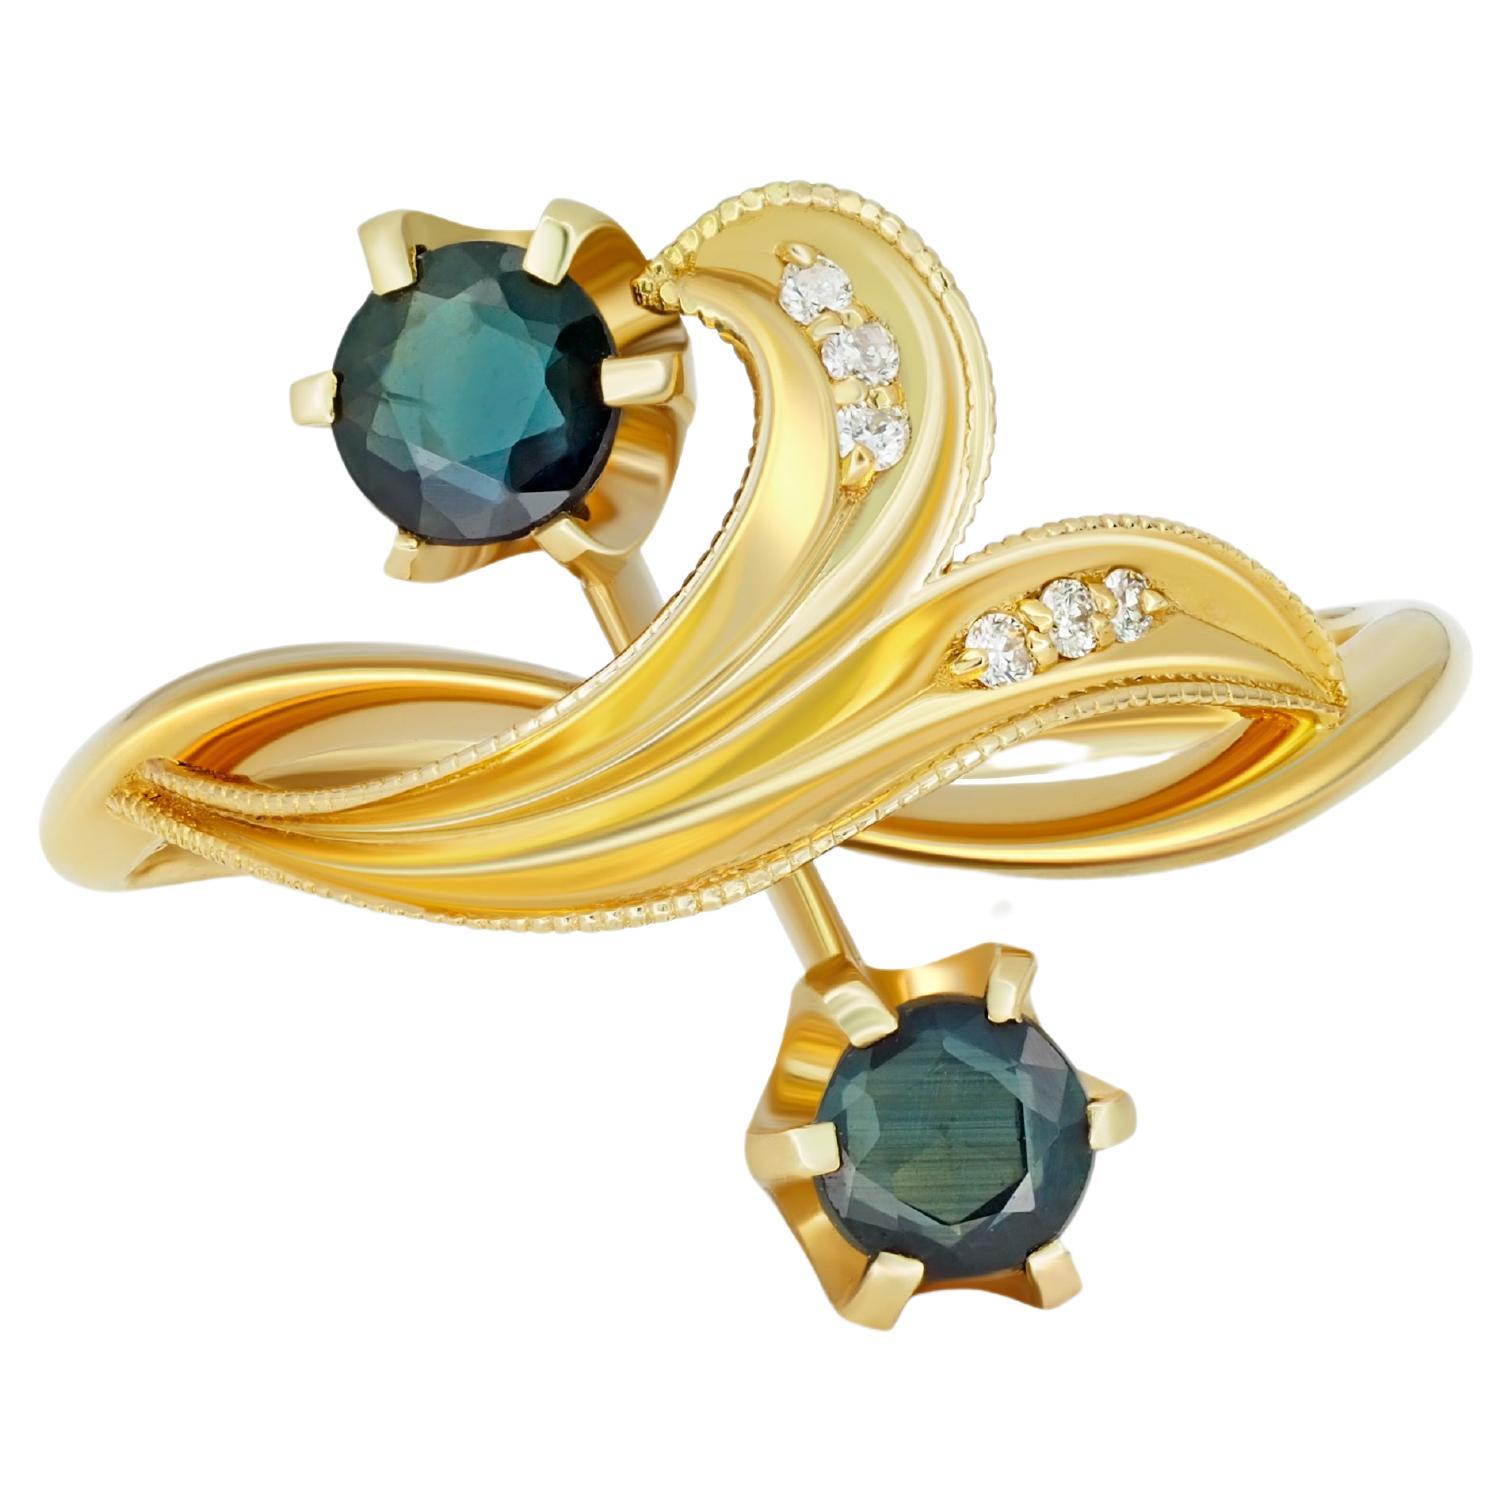 14k gold ring with Round Sapphires. 